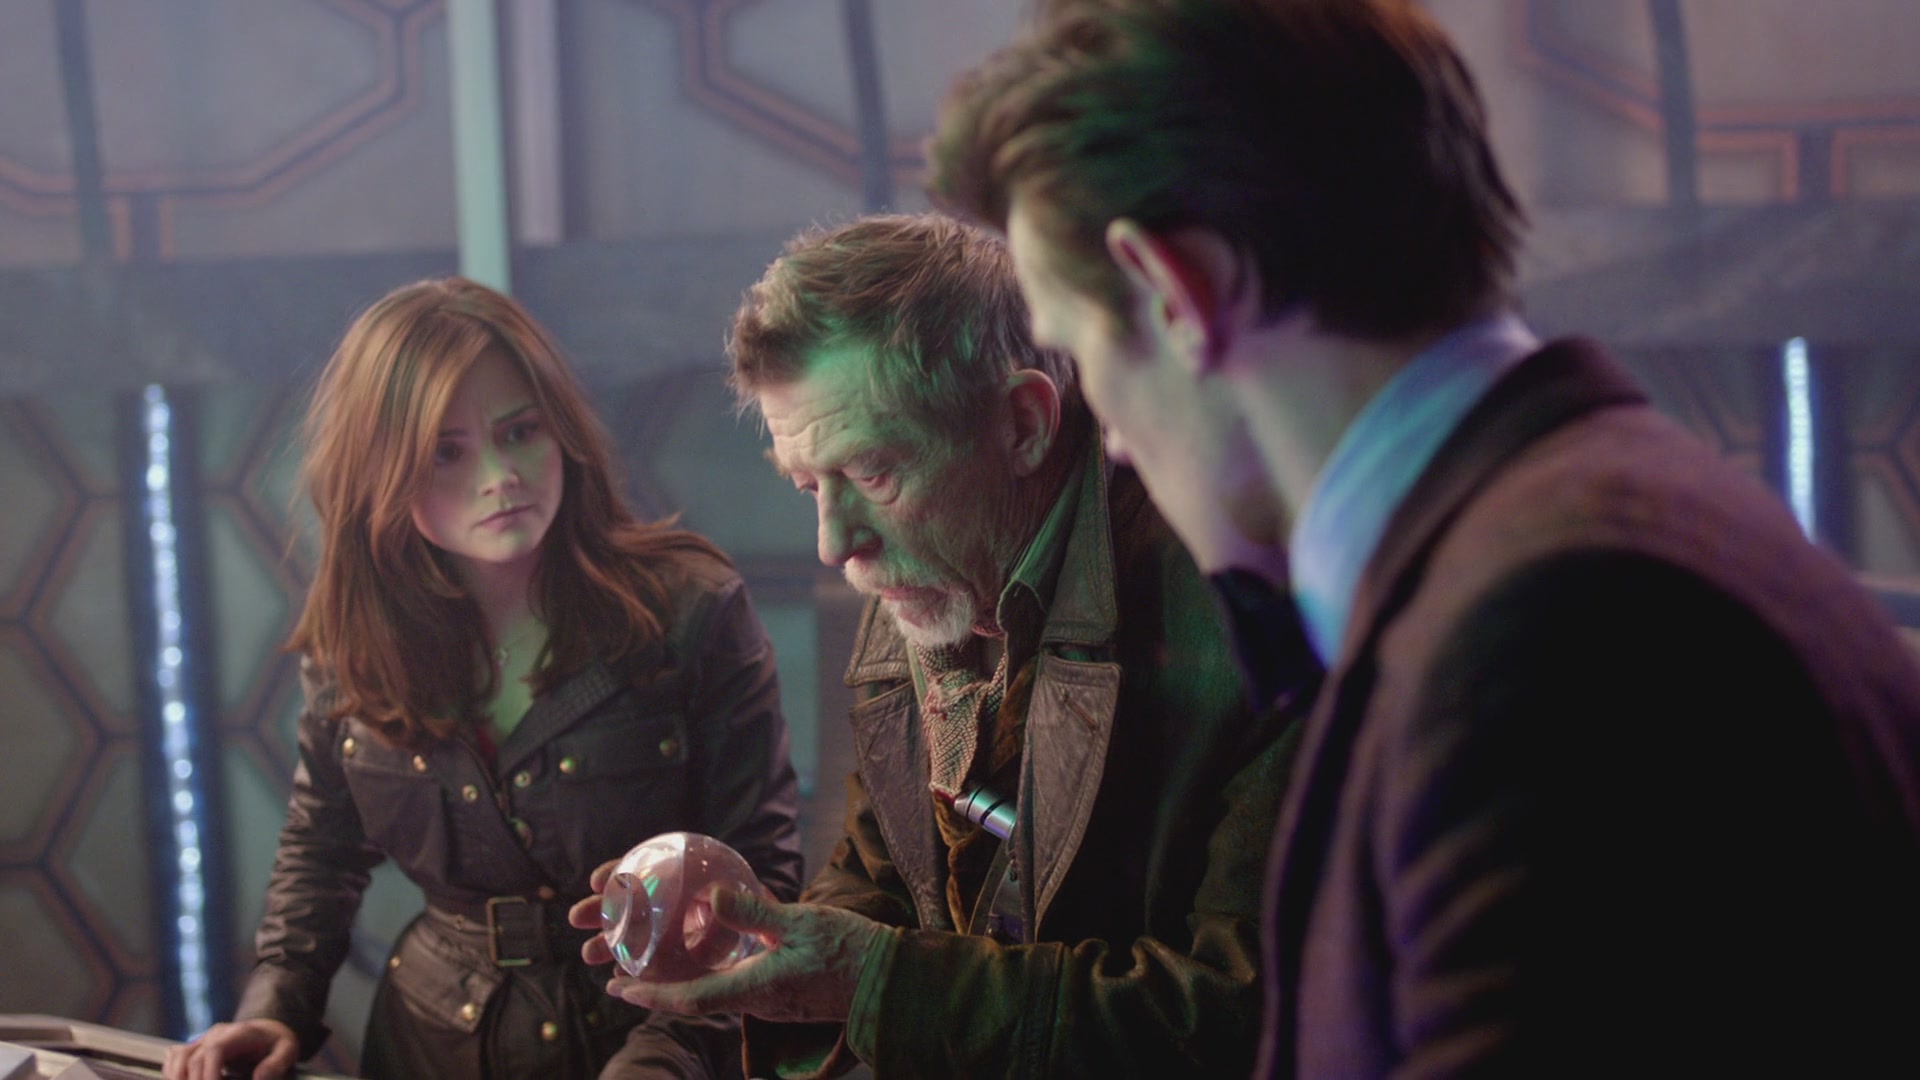 DayOfTheDoctor-Caps-0940.jpg